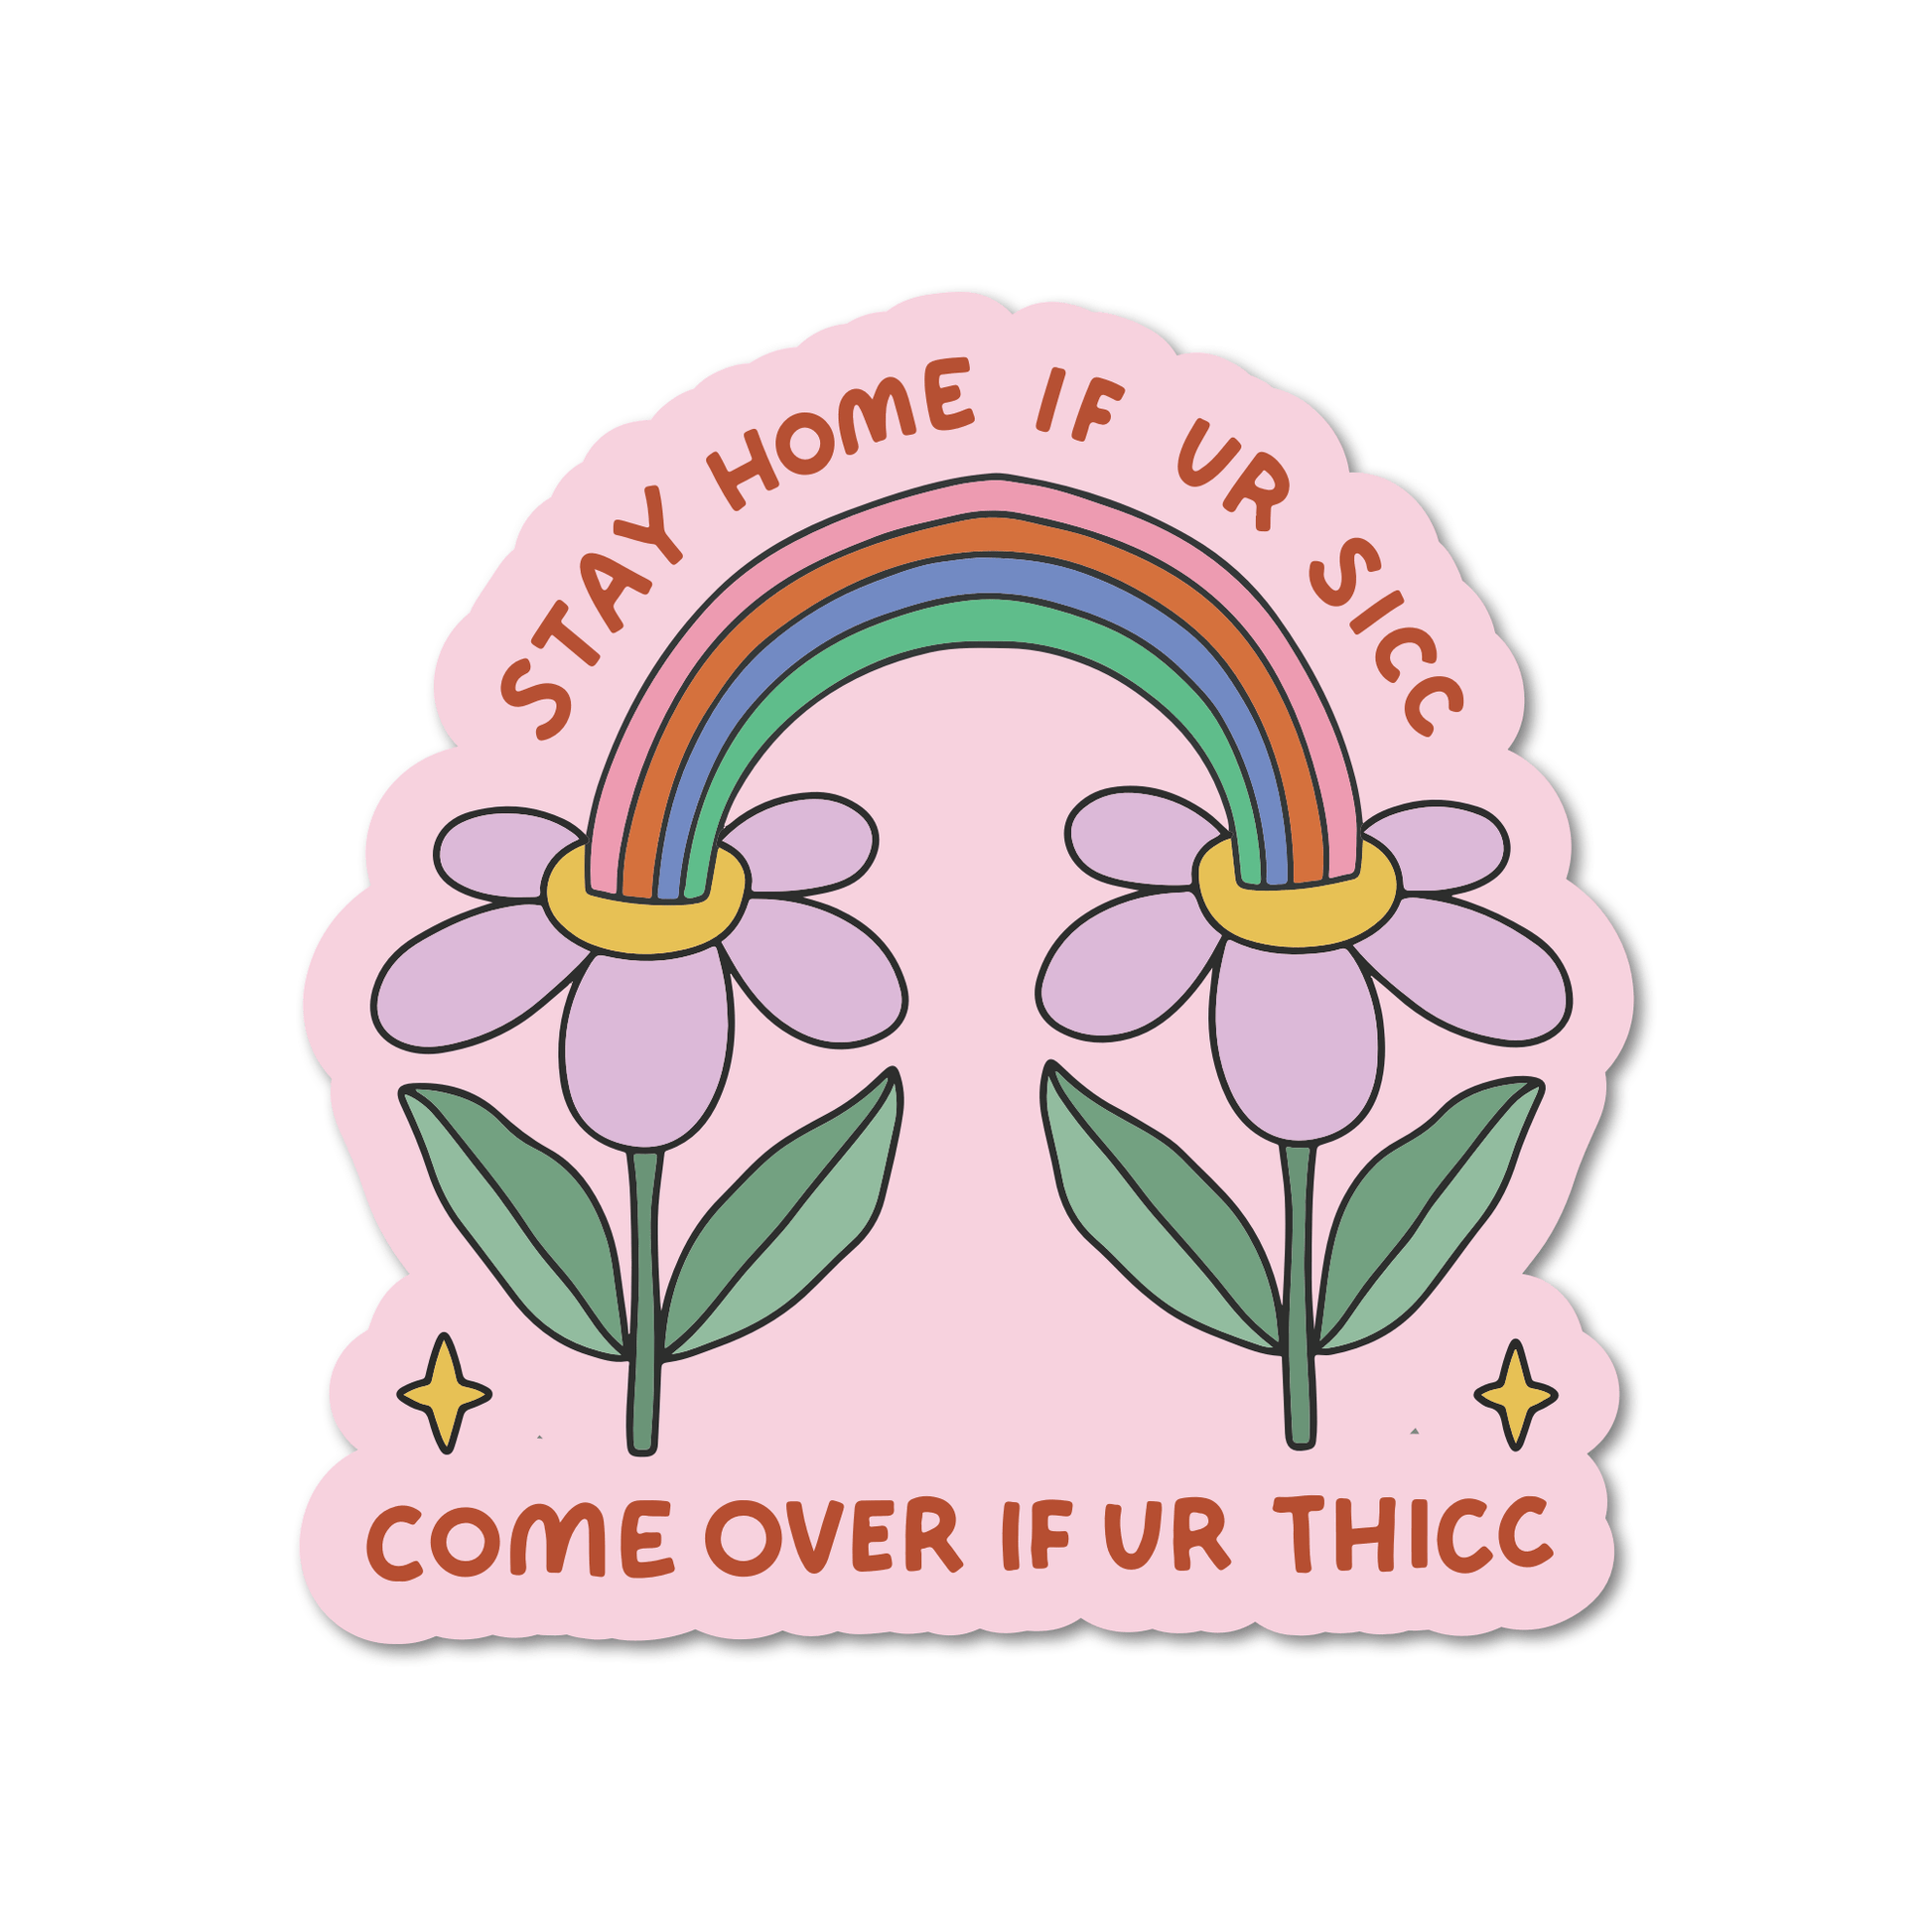 Stay Home If You're Sicc Come Over If You're Thicc Sticker - QBoutiqueOKC